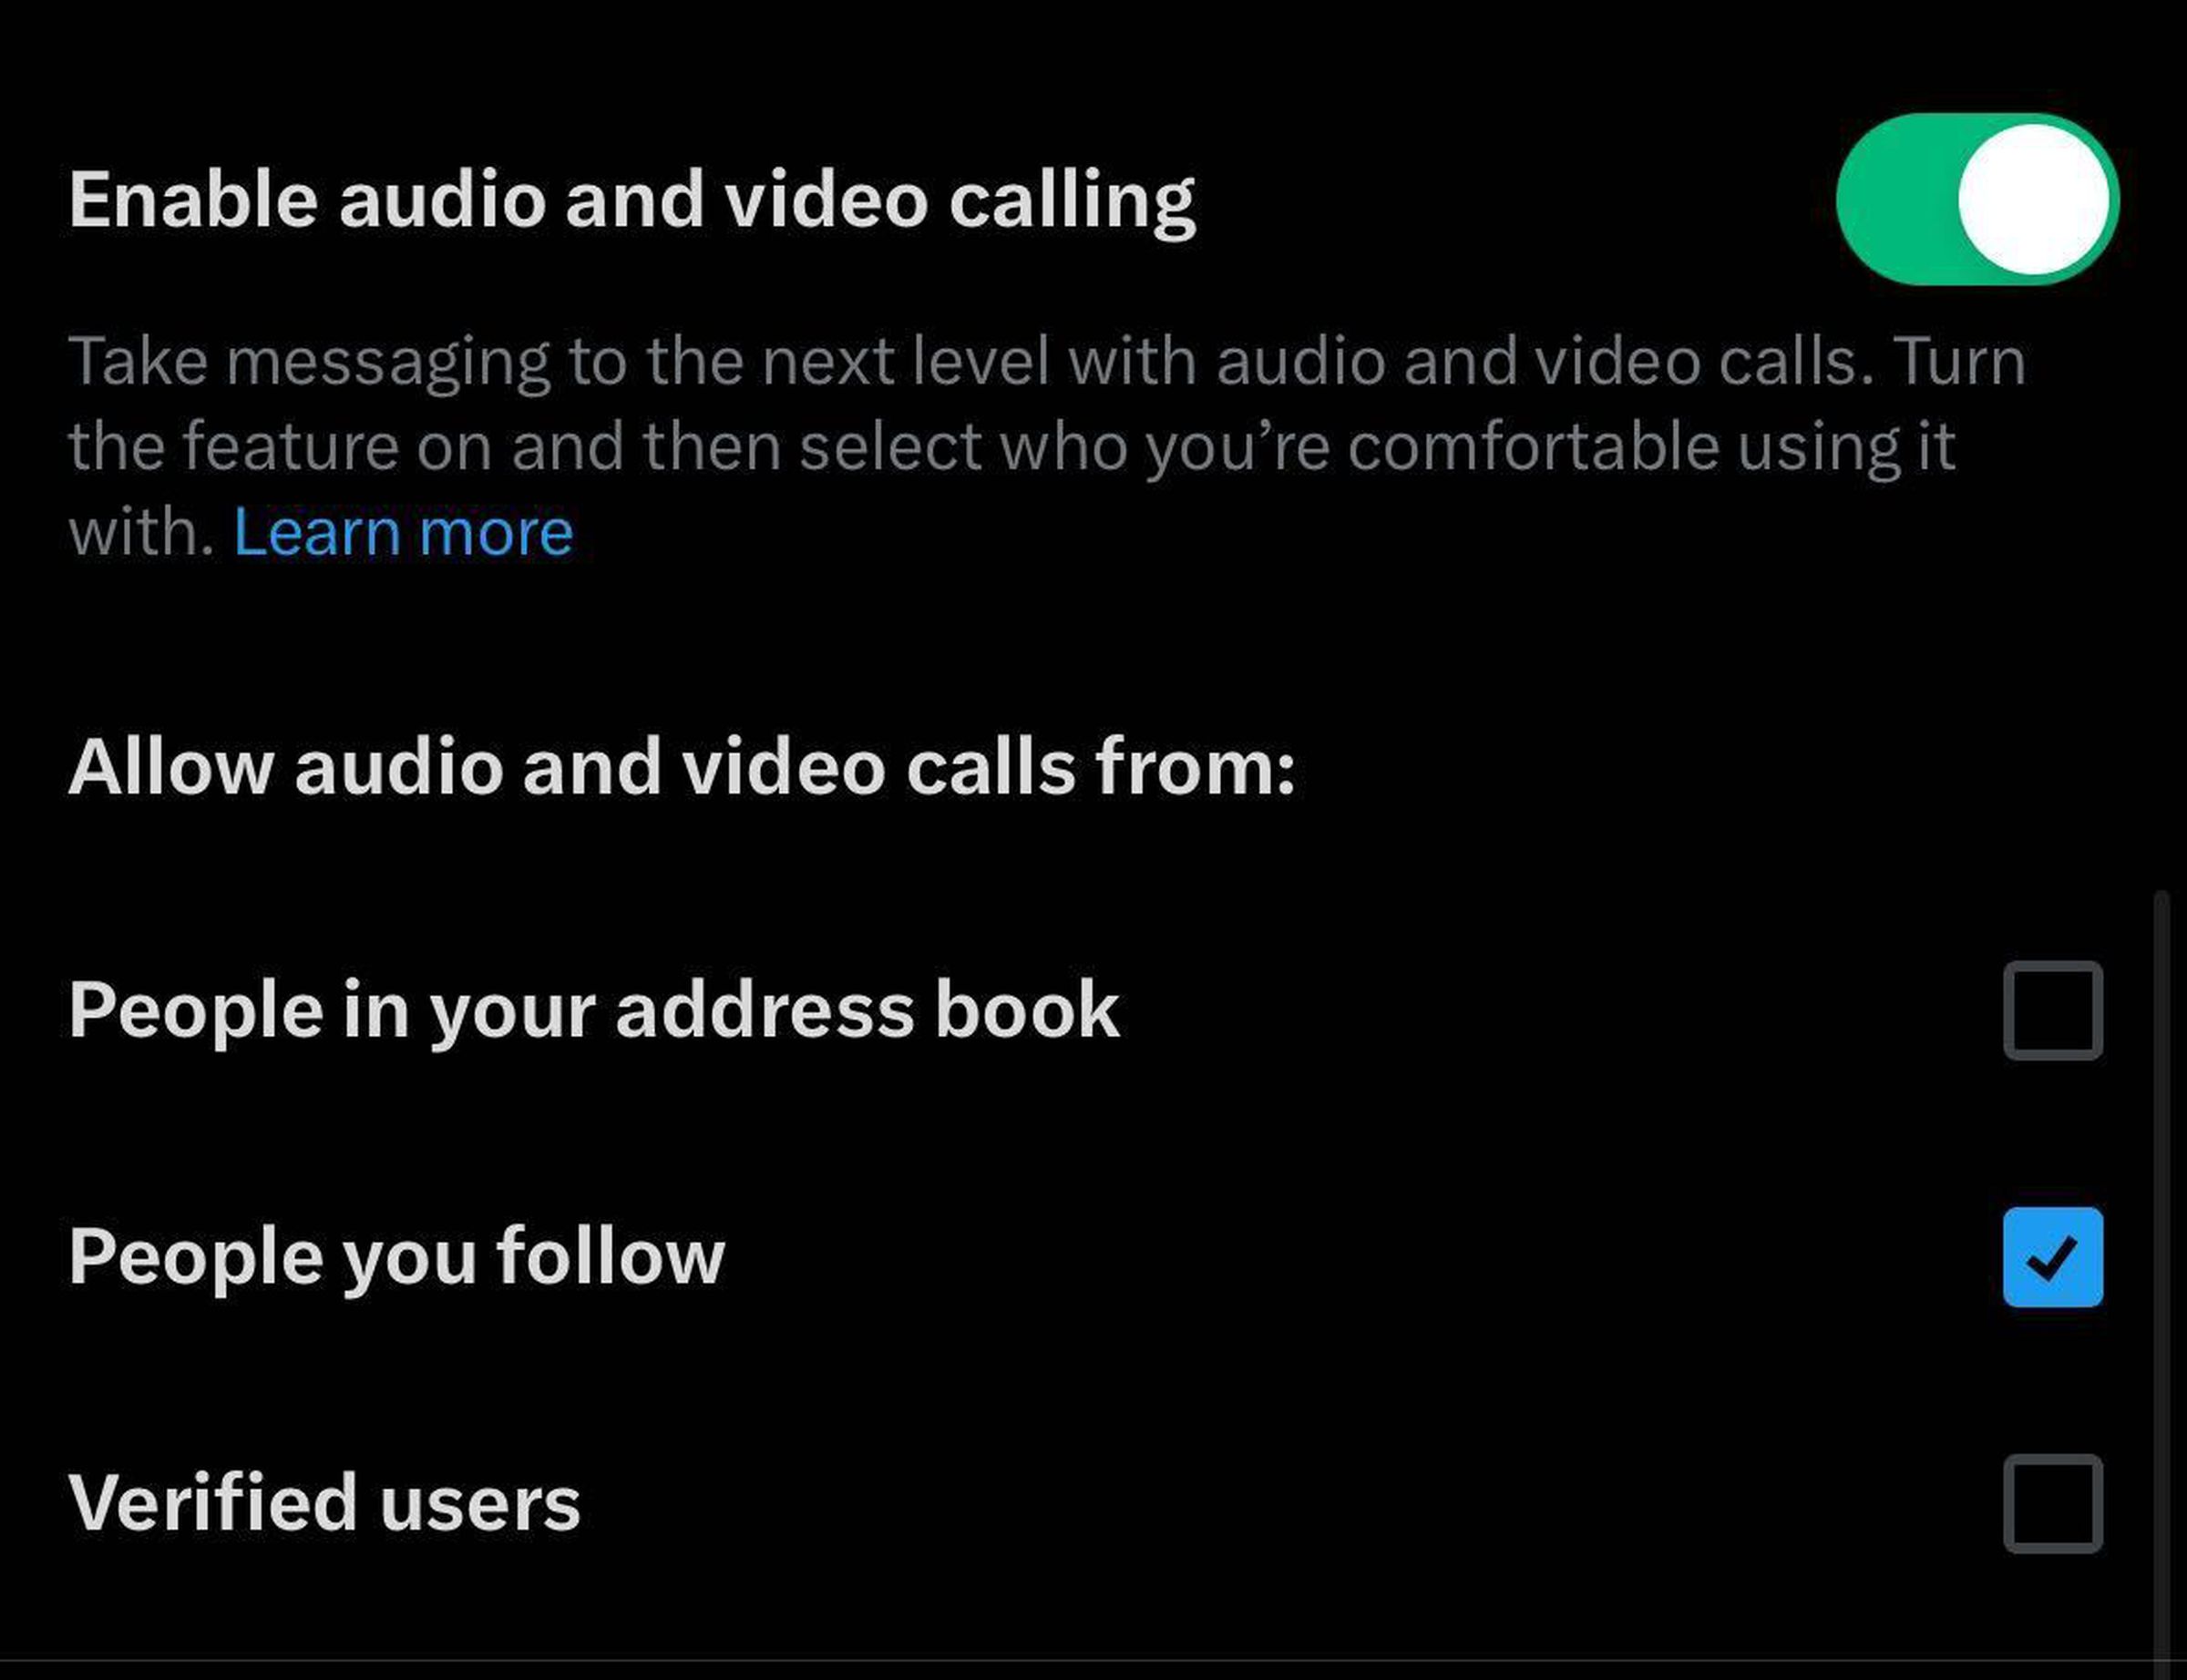 X’s settings now include options for audio and video calling.